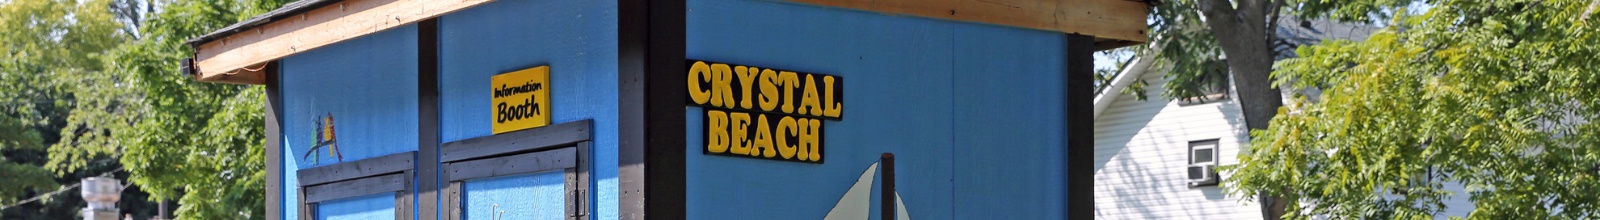 A small shack with a small sign that says Crystal Beach